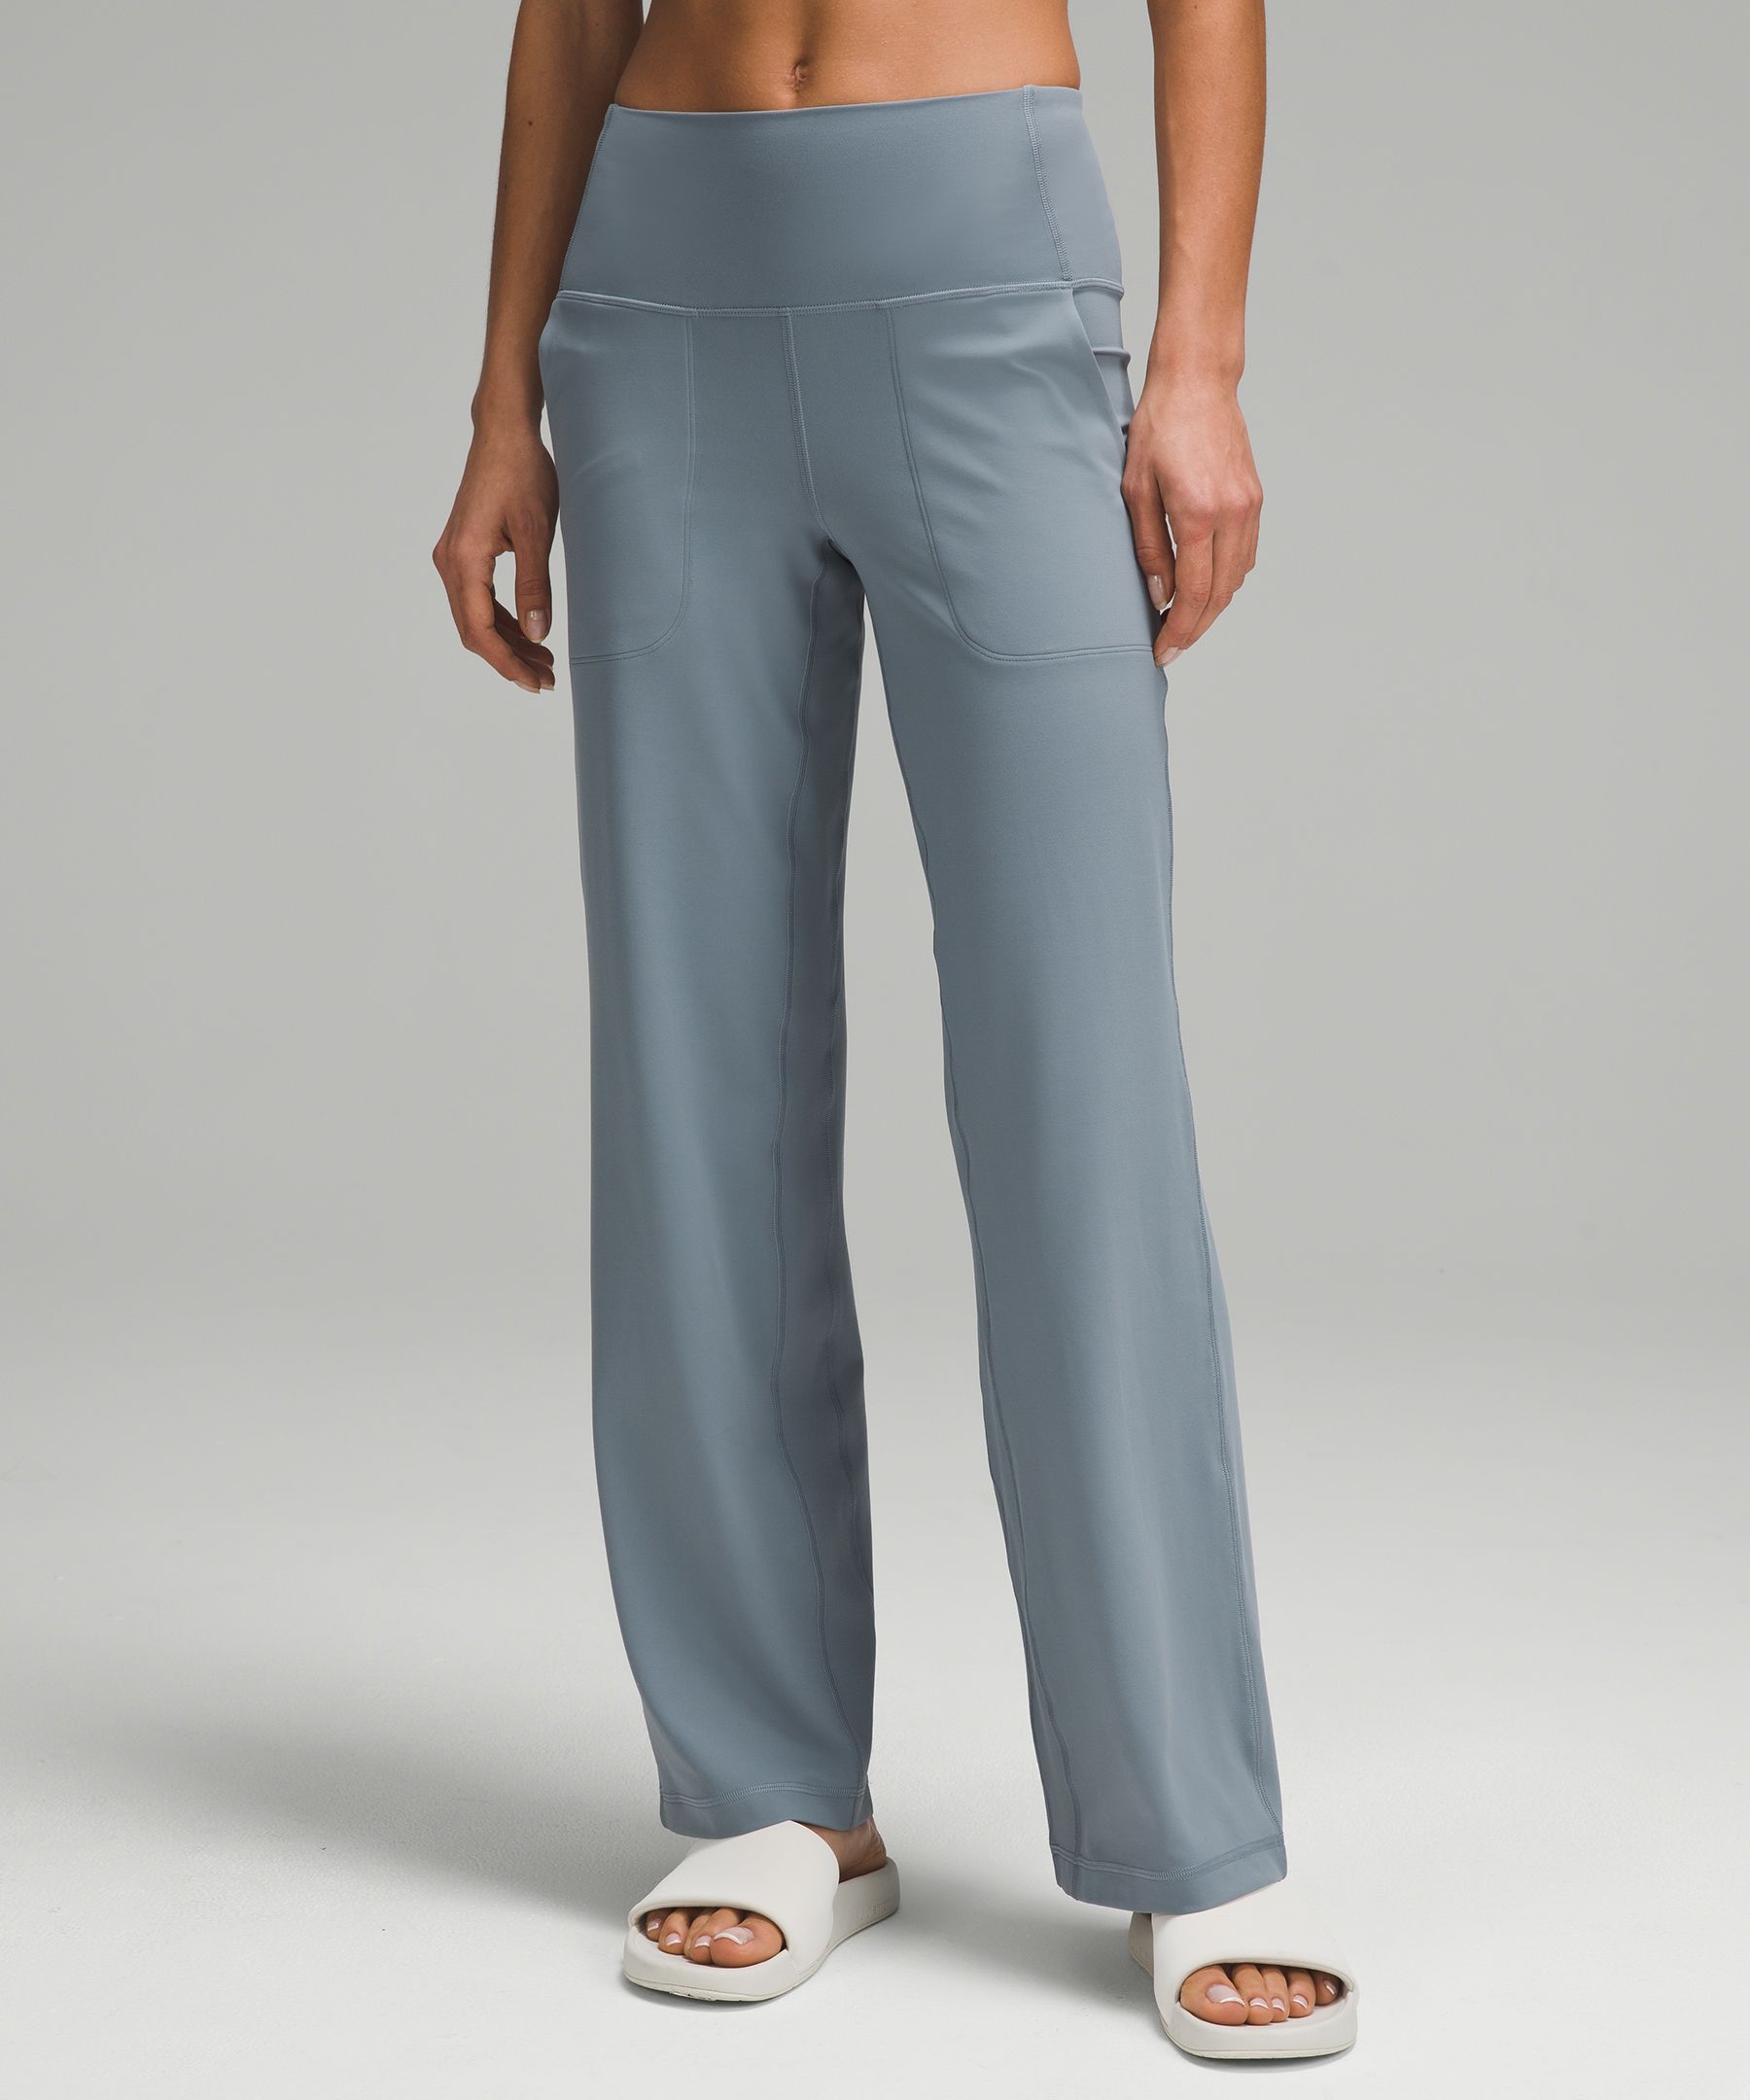 yall already know i live for these align wide length pants